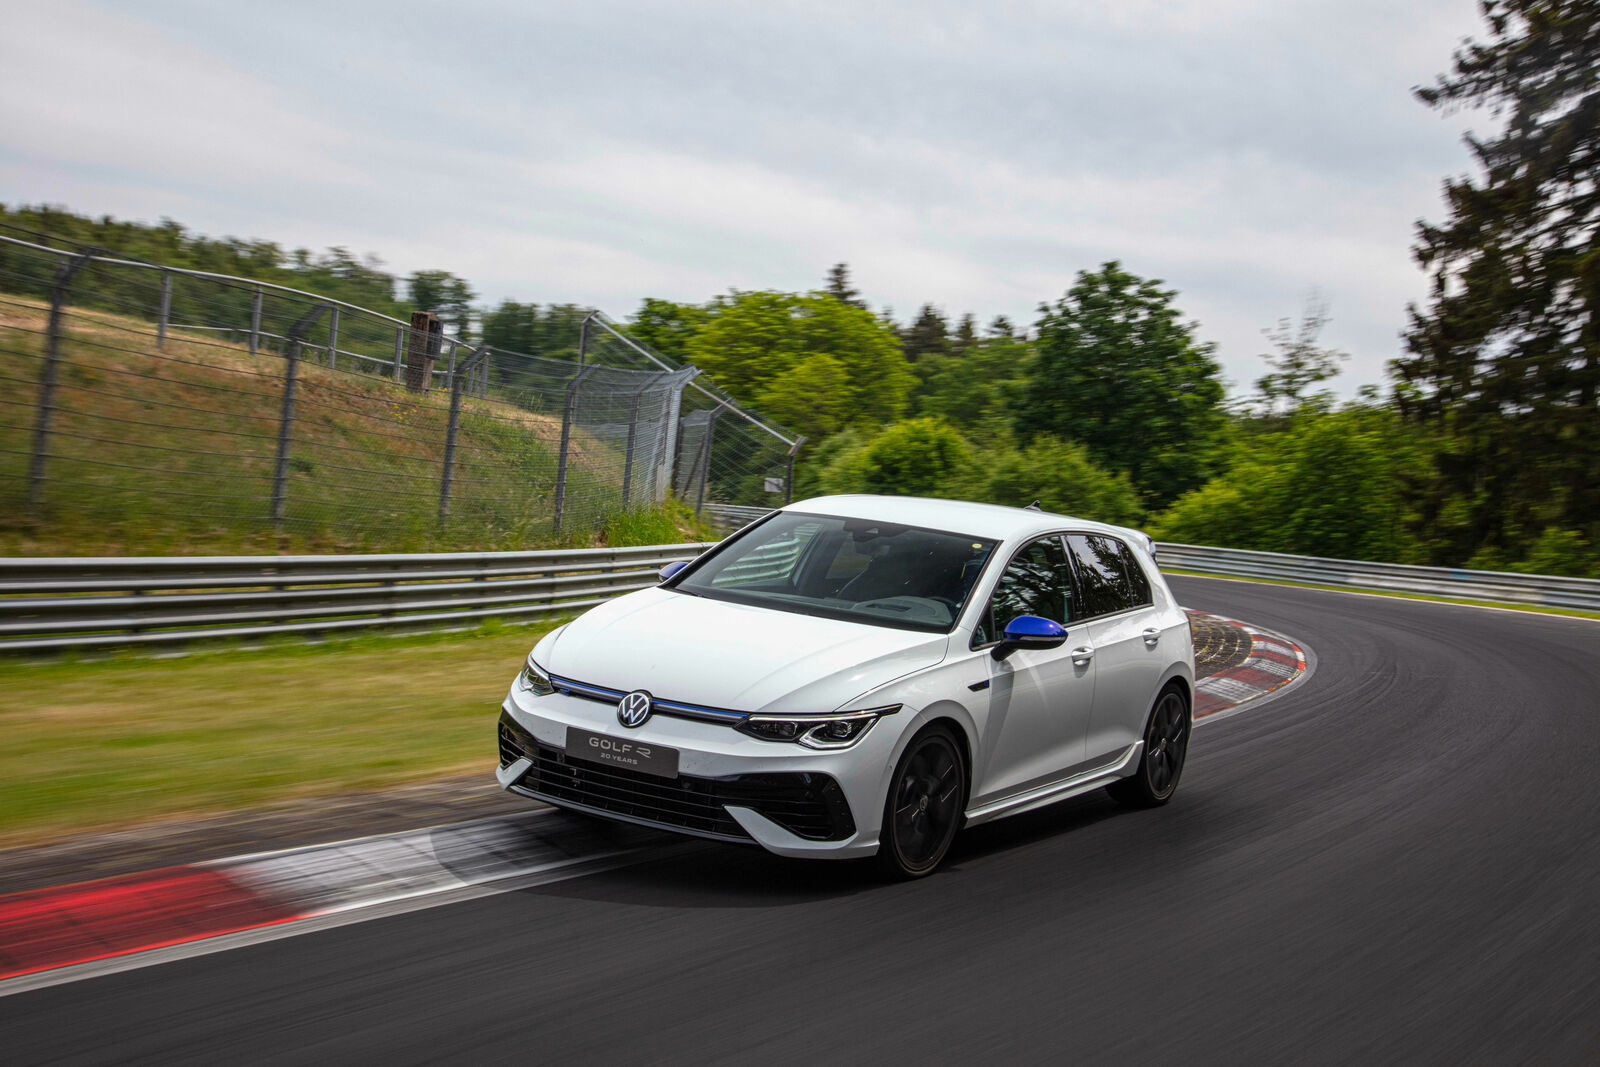 The Golf R “20 Years” is the fastest Volkswagen R ever on the Nürburgring- Nordschleife